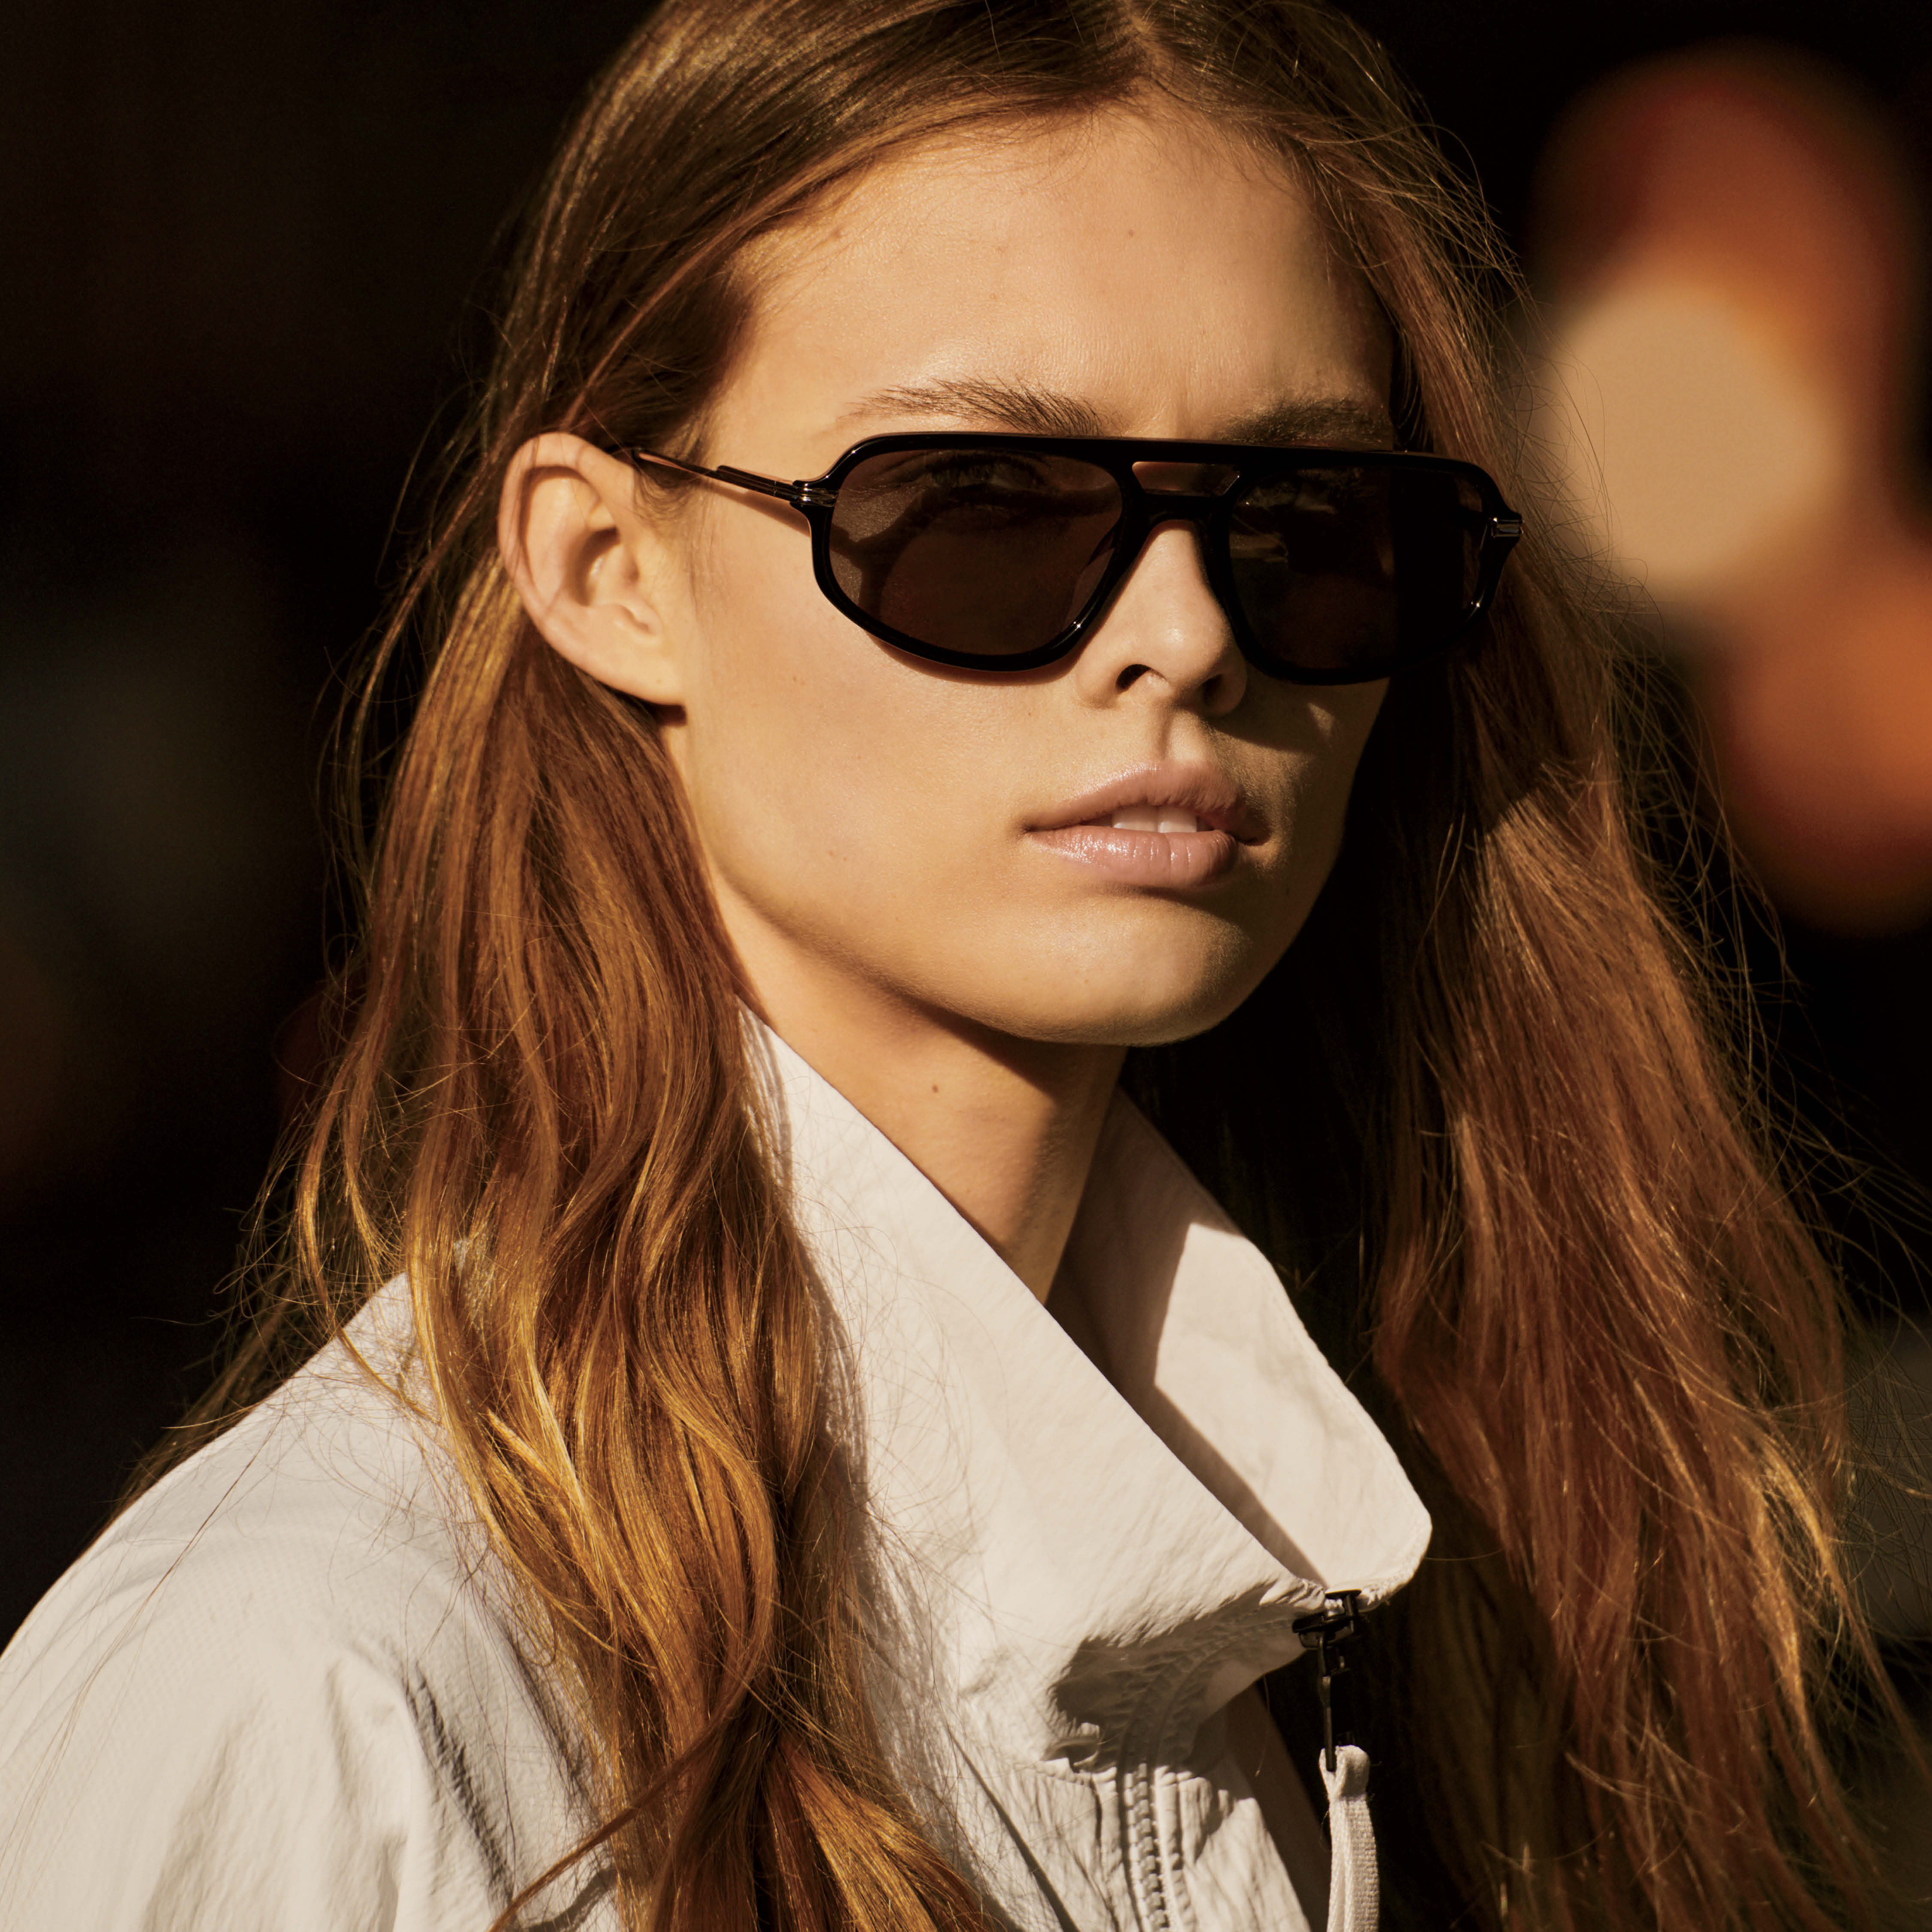 Meet the Spring Eyewear Styles I've Already Spotted in NYC and Los Angeles